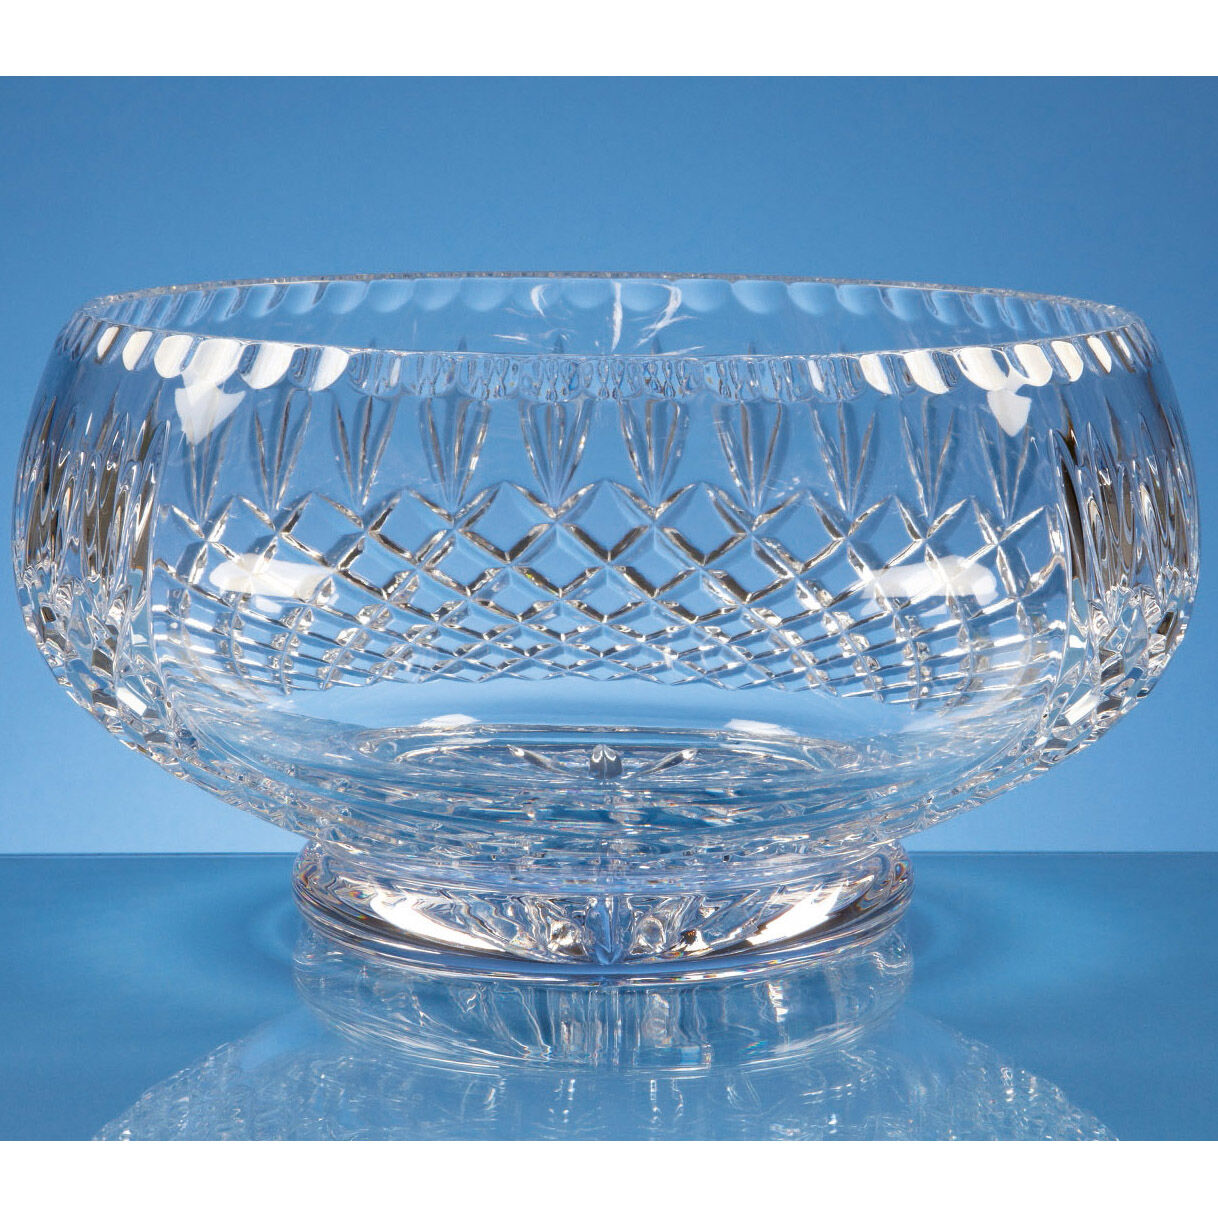 Engraved Lead Crystal Bowls and Vases